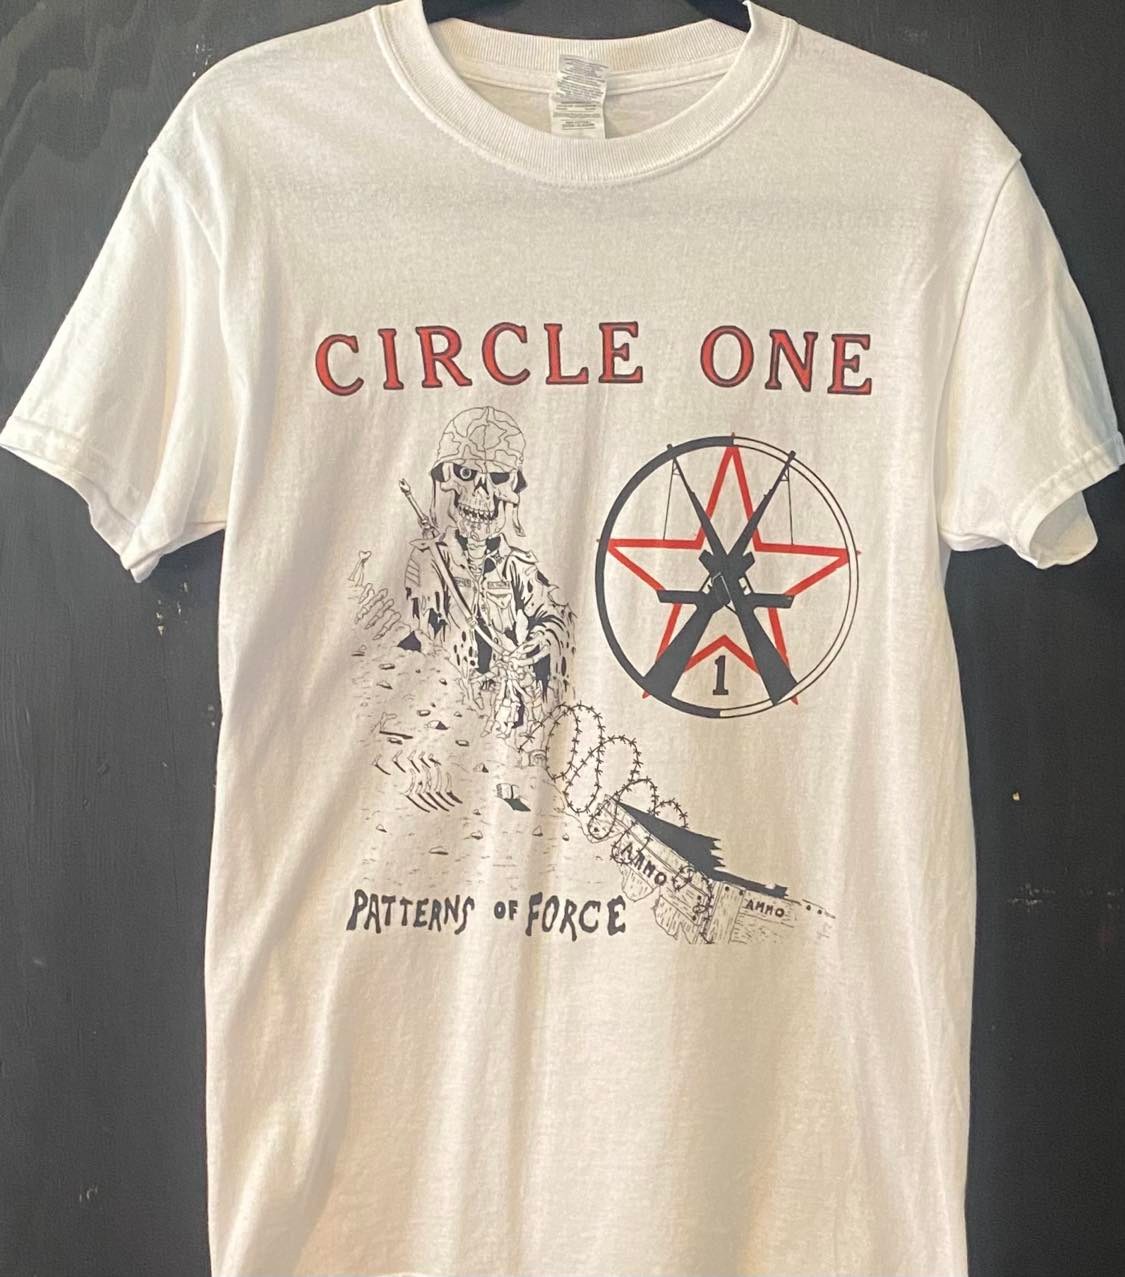 CIRCLE ONE | patterns of force t-shirt